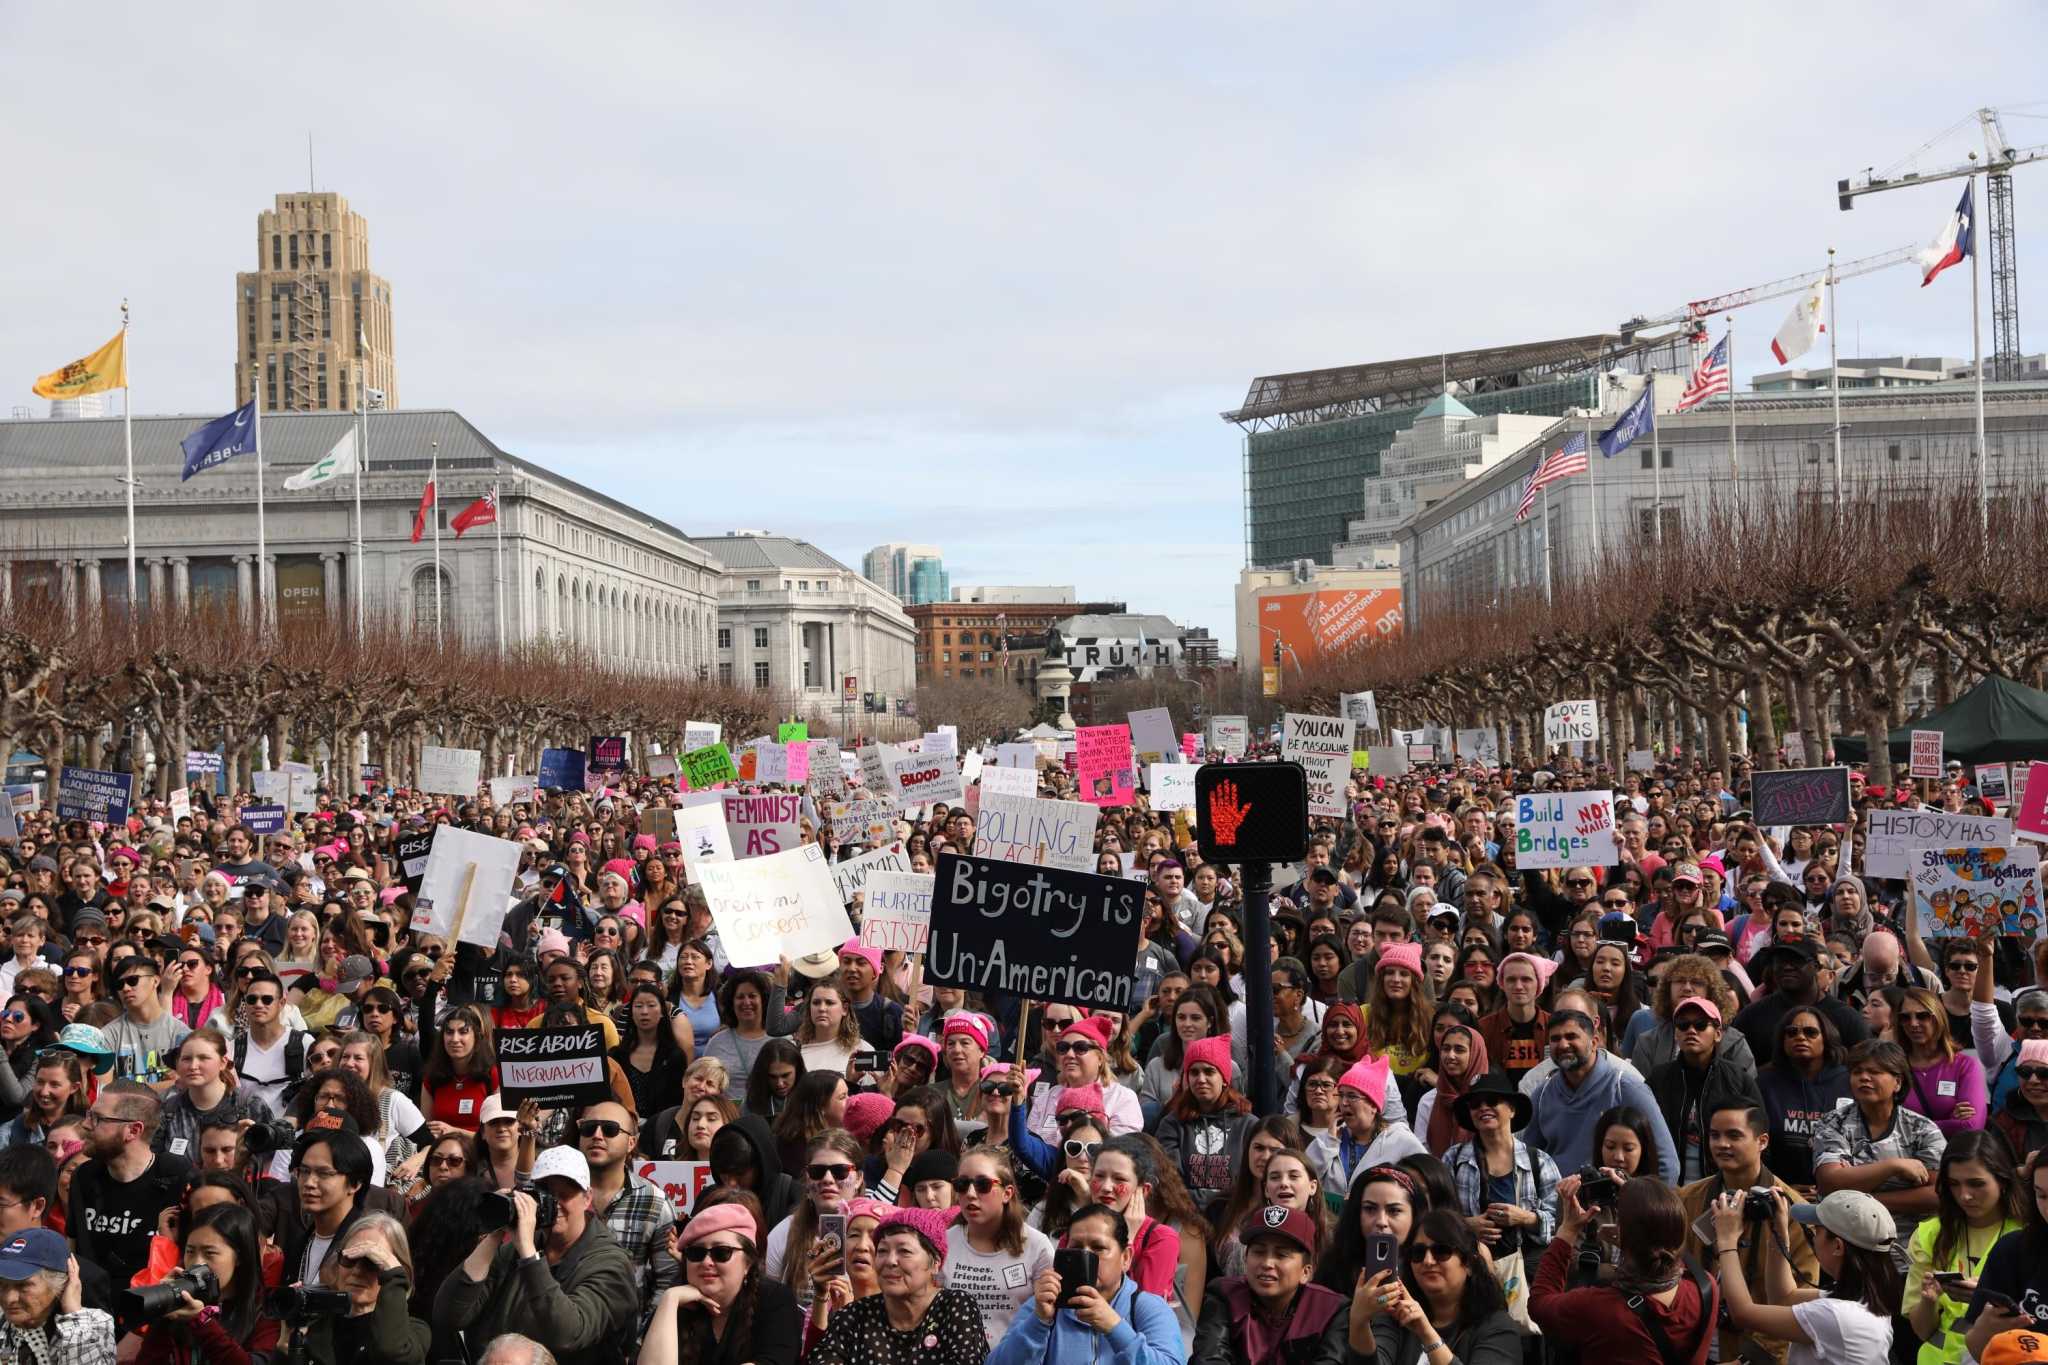 Thousands rally for justice at Women's March in SF